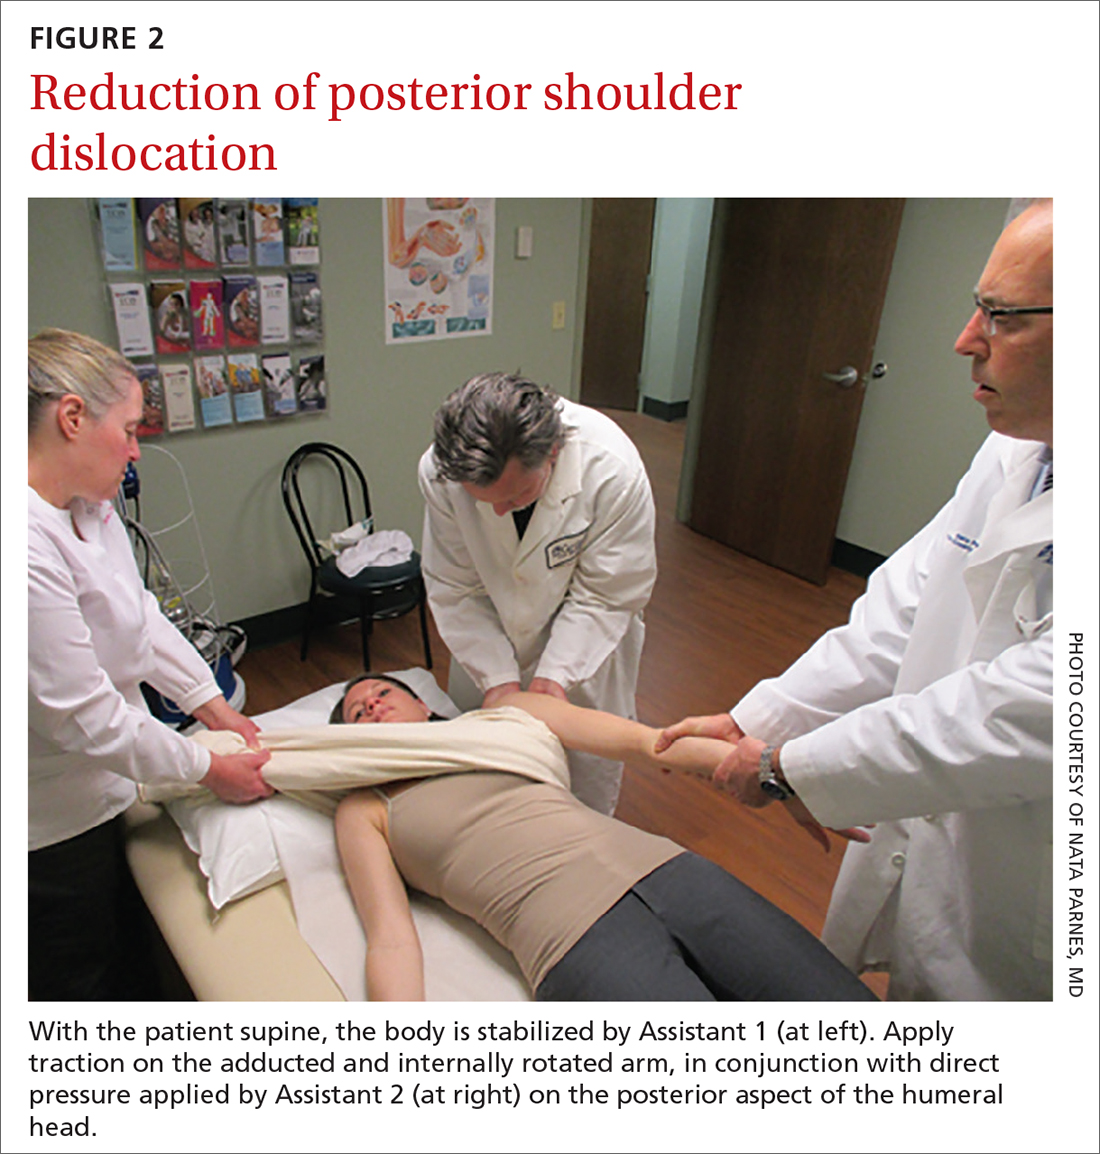 Reduction of posterior shoulder dislocation